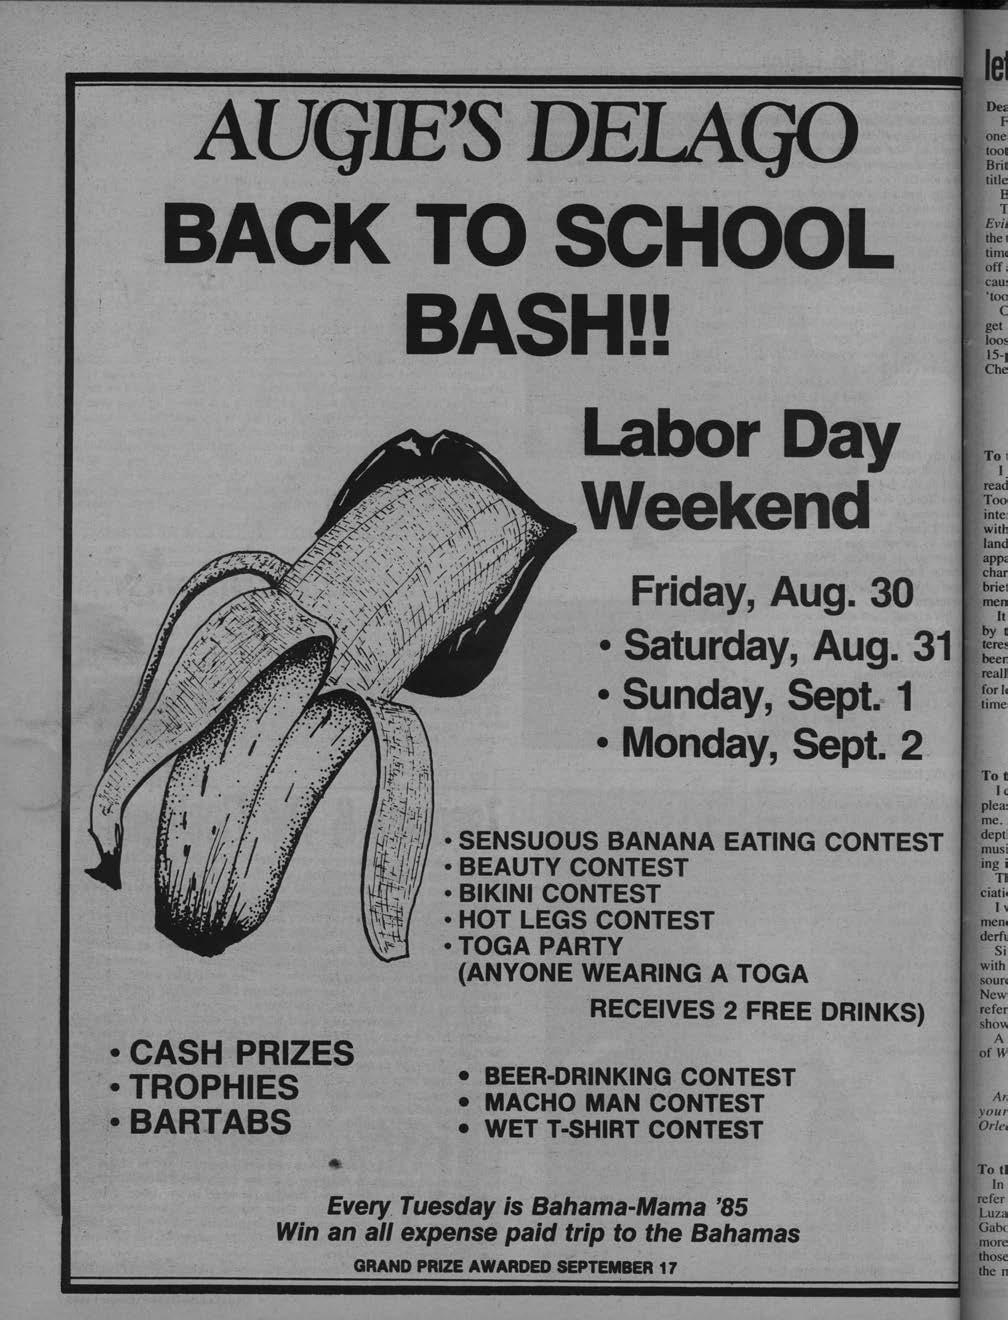 AUGIE'S DELA_ BACK TO SCHOOL BASH!! Labor Day Weekend Evi the tim off To I Friday, Aug. 30 Saturday, Aug. 31 Sunday, Sept.~ 1 Monday, Sept. 2 CASH PRIZES TROPHIES.